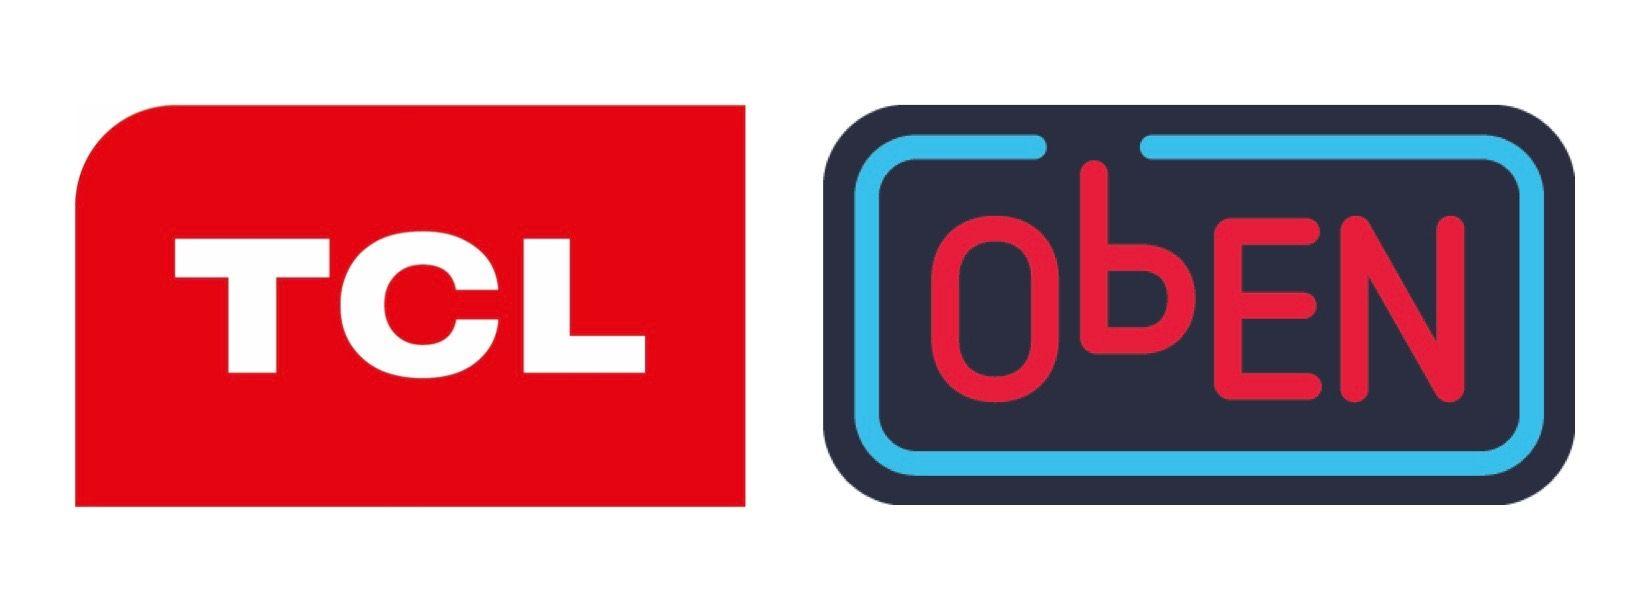 TCL Logo - ObEN and TCL Join Forces at CES 2016 | ObEN, Inc.